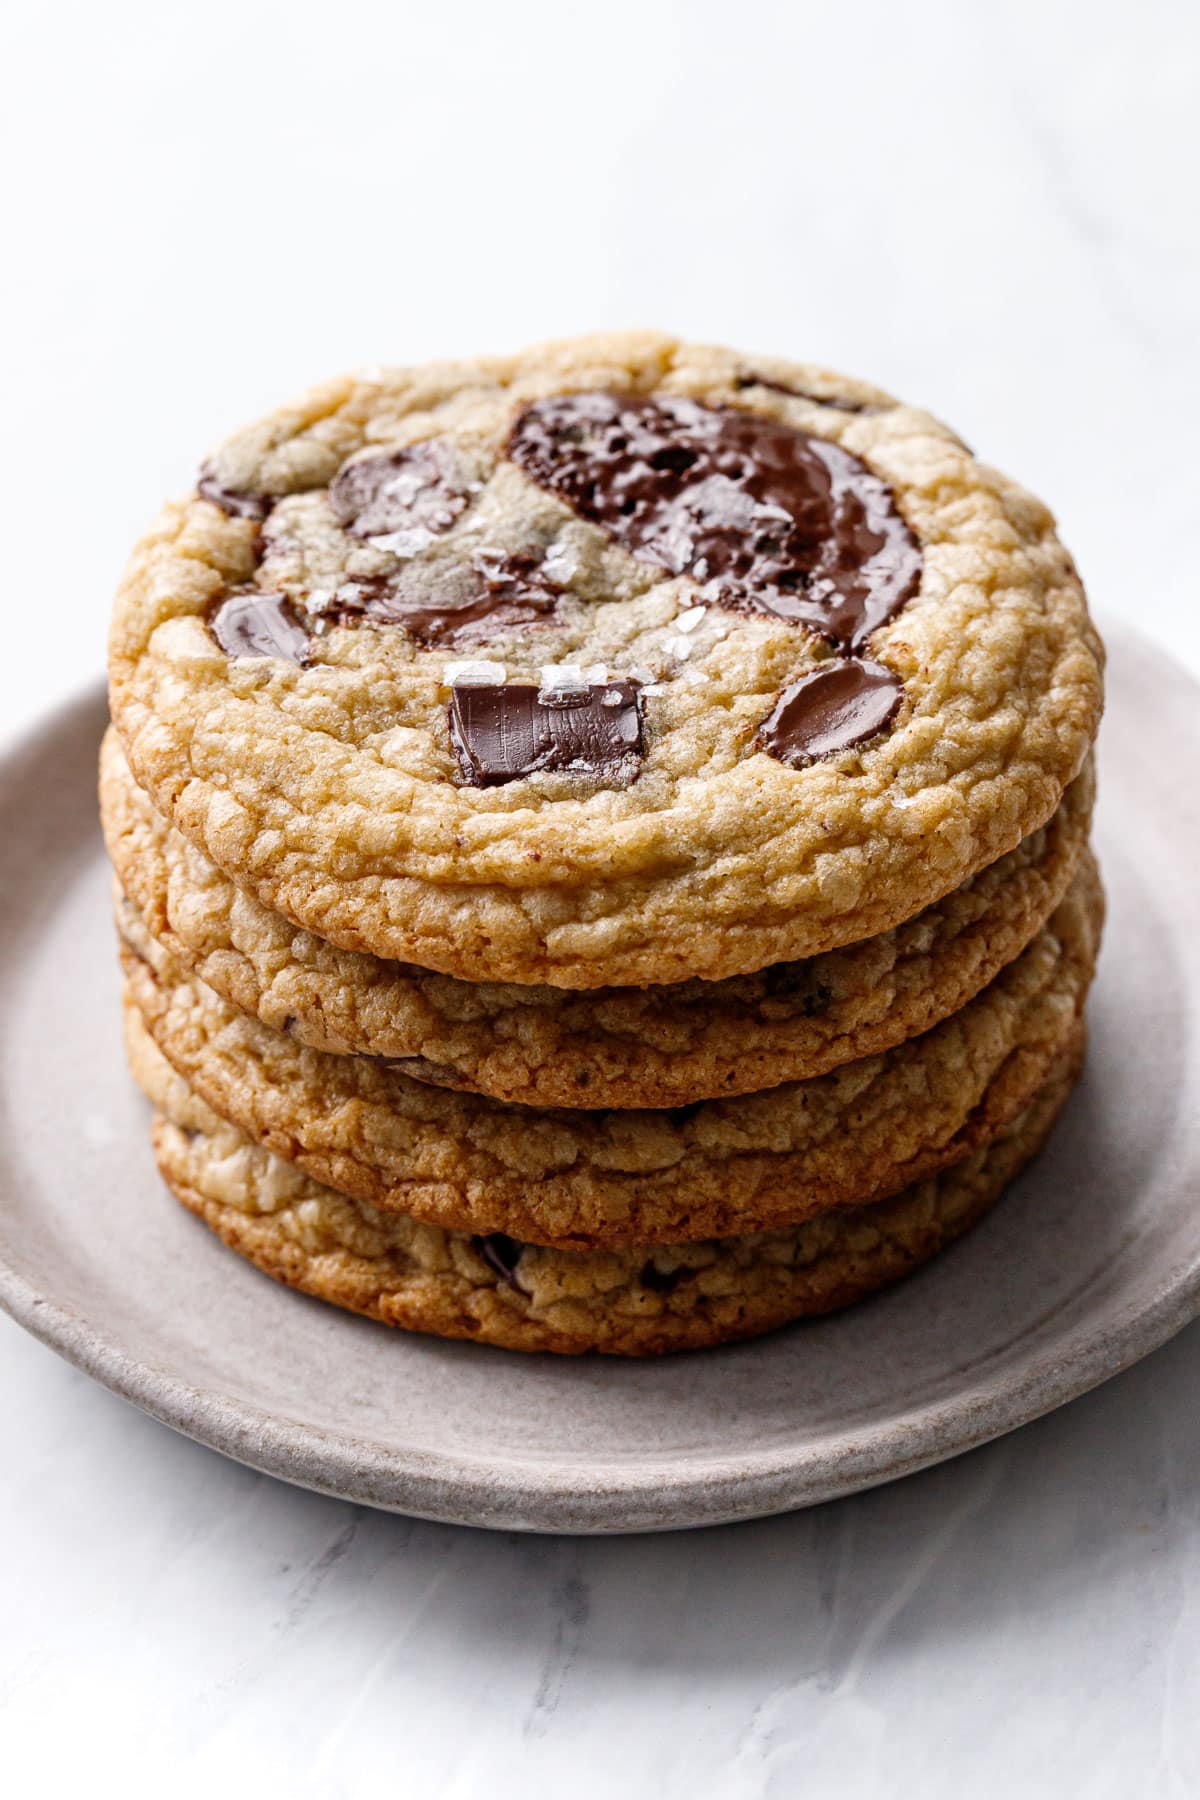 Stack of 4 Amaretto Chocolate Chip Cookies on a ceramic plate, light reflecting off the melted chocolate puddles on top.